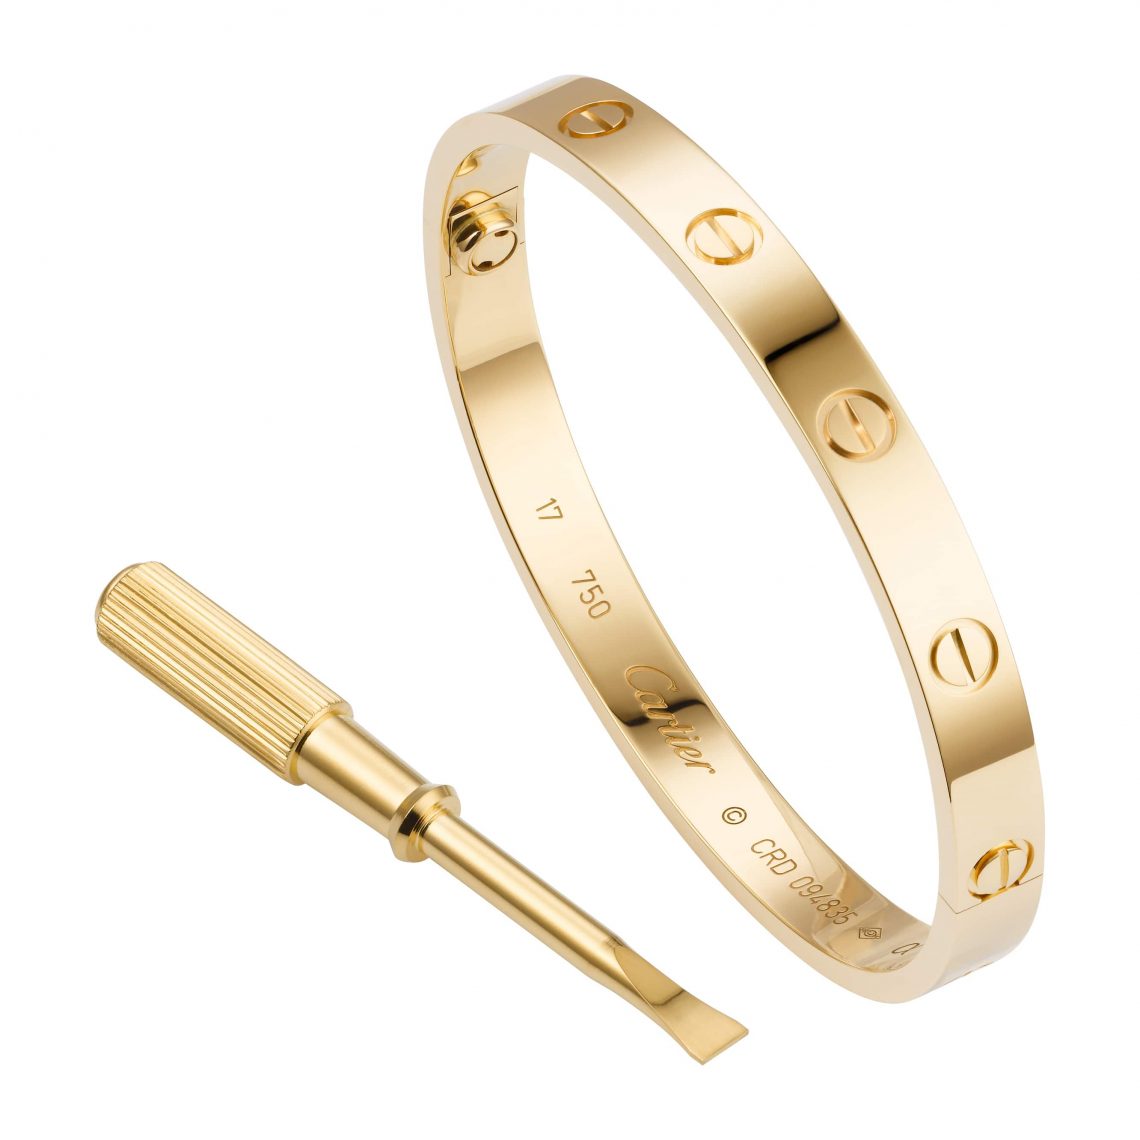 Cartier-love-bangle-gold-iconic-cult-jewellery